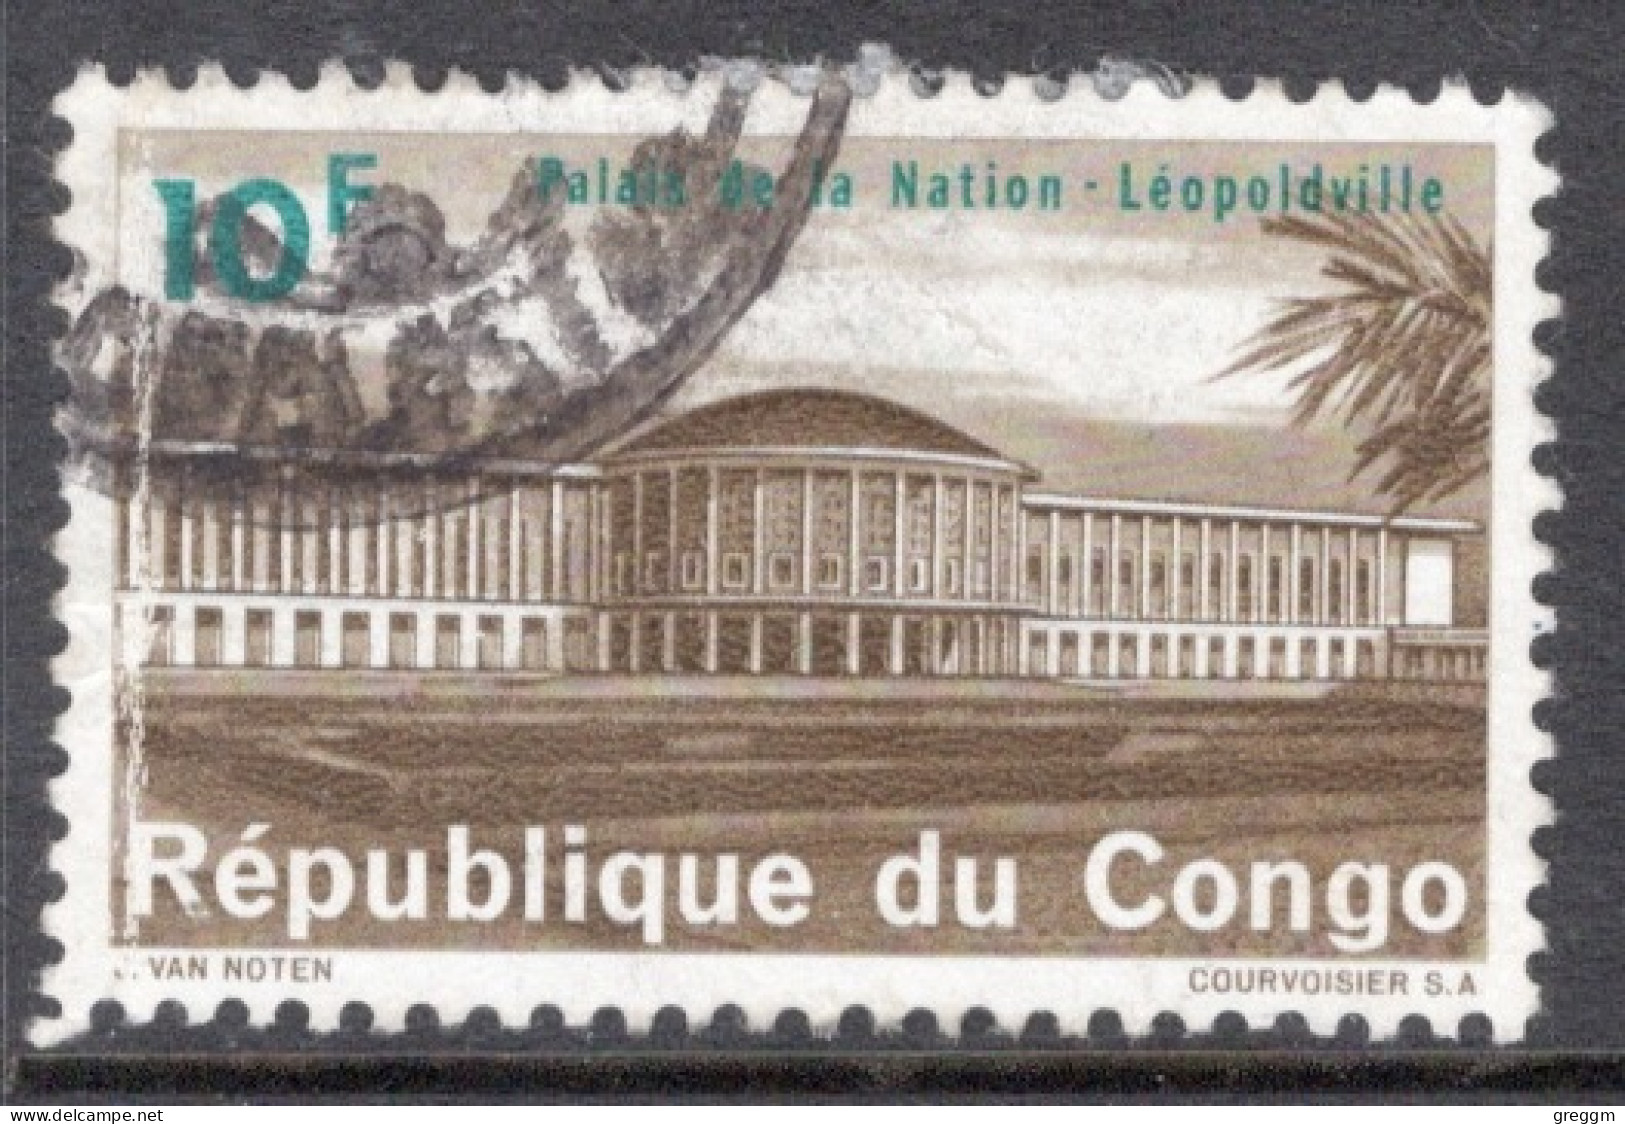 Kinshasa Congo 1964 Single 10f Stamp From The Definitive Set  National Palace, Leopoldville  In Fine Used. - Used Stamps